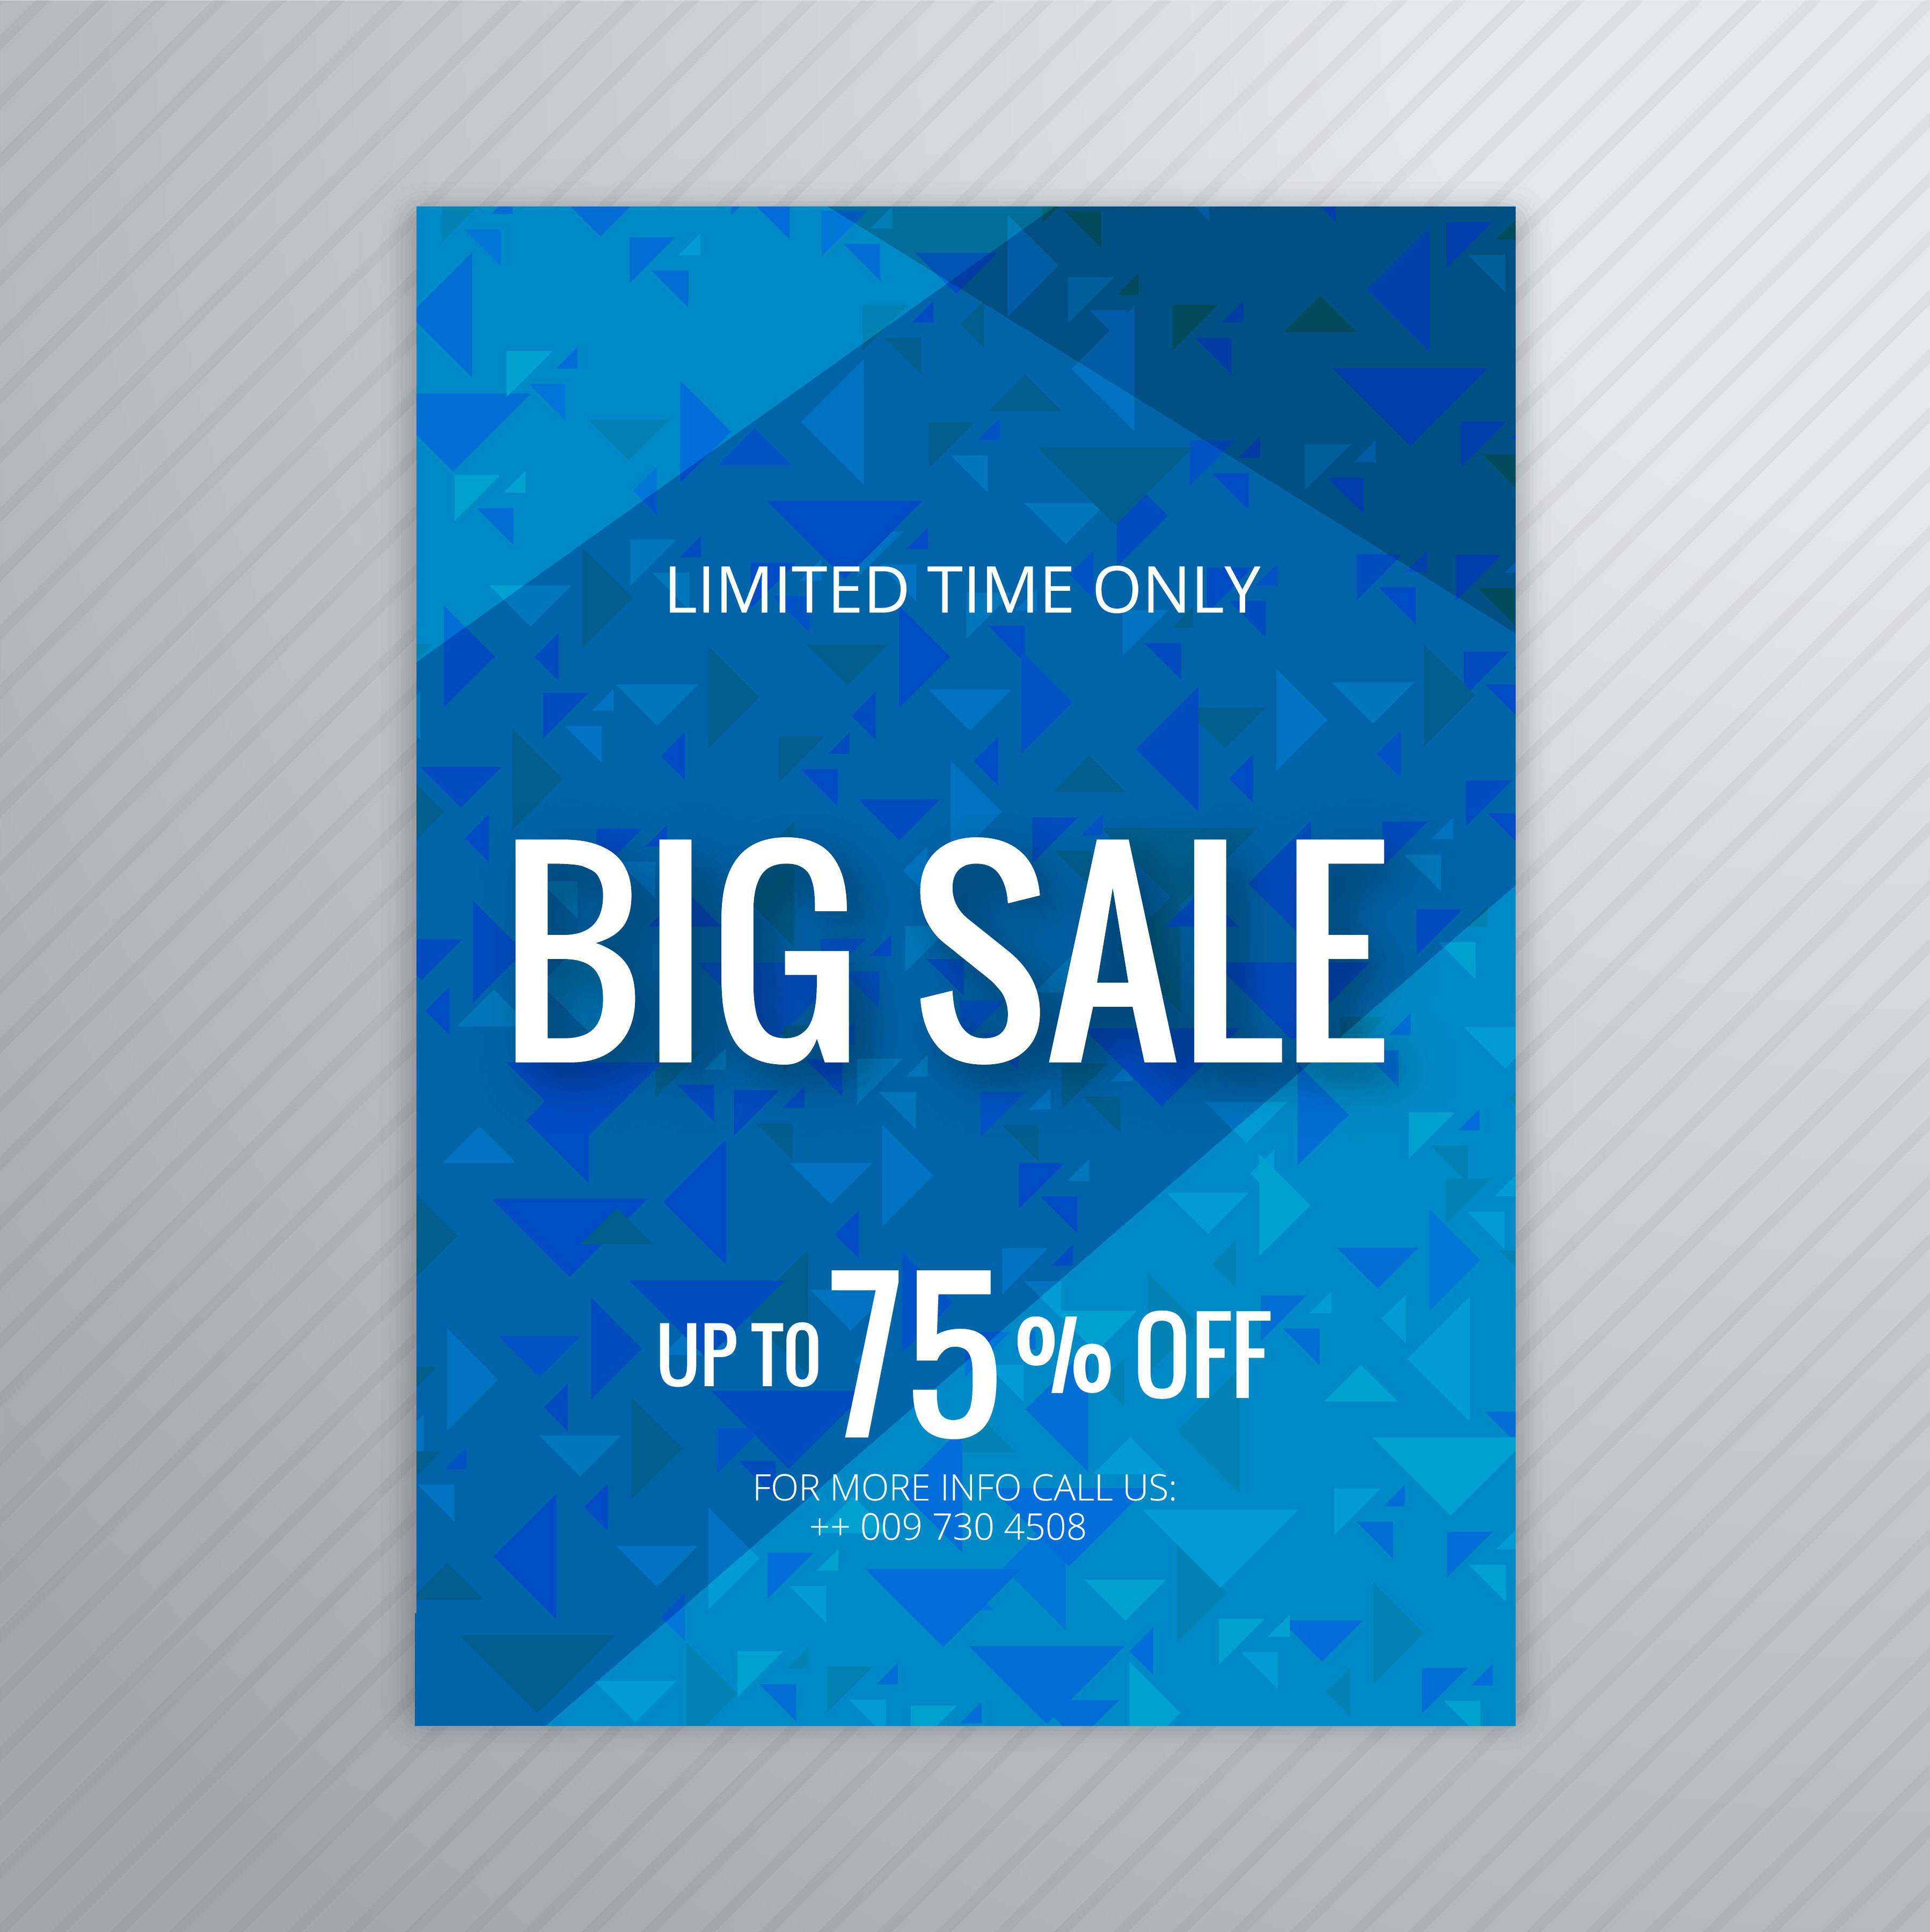 Sale Brochure Template from static.vecteezy.com